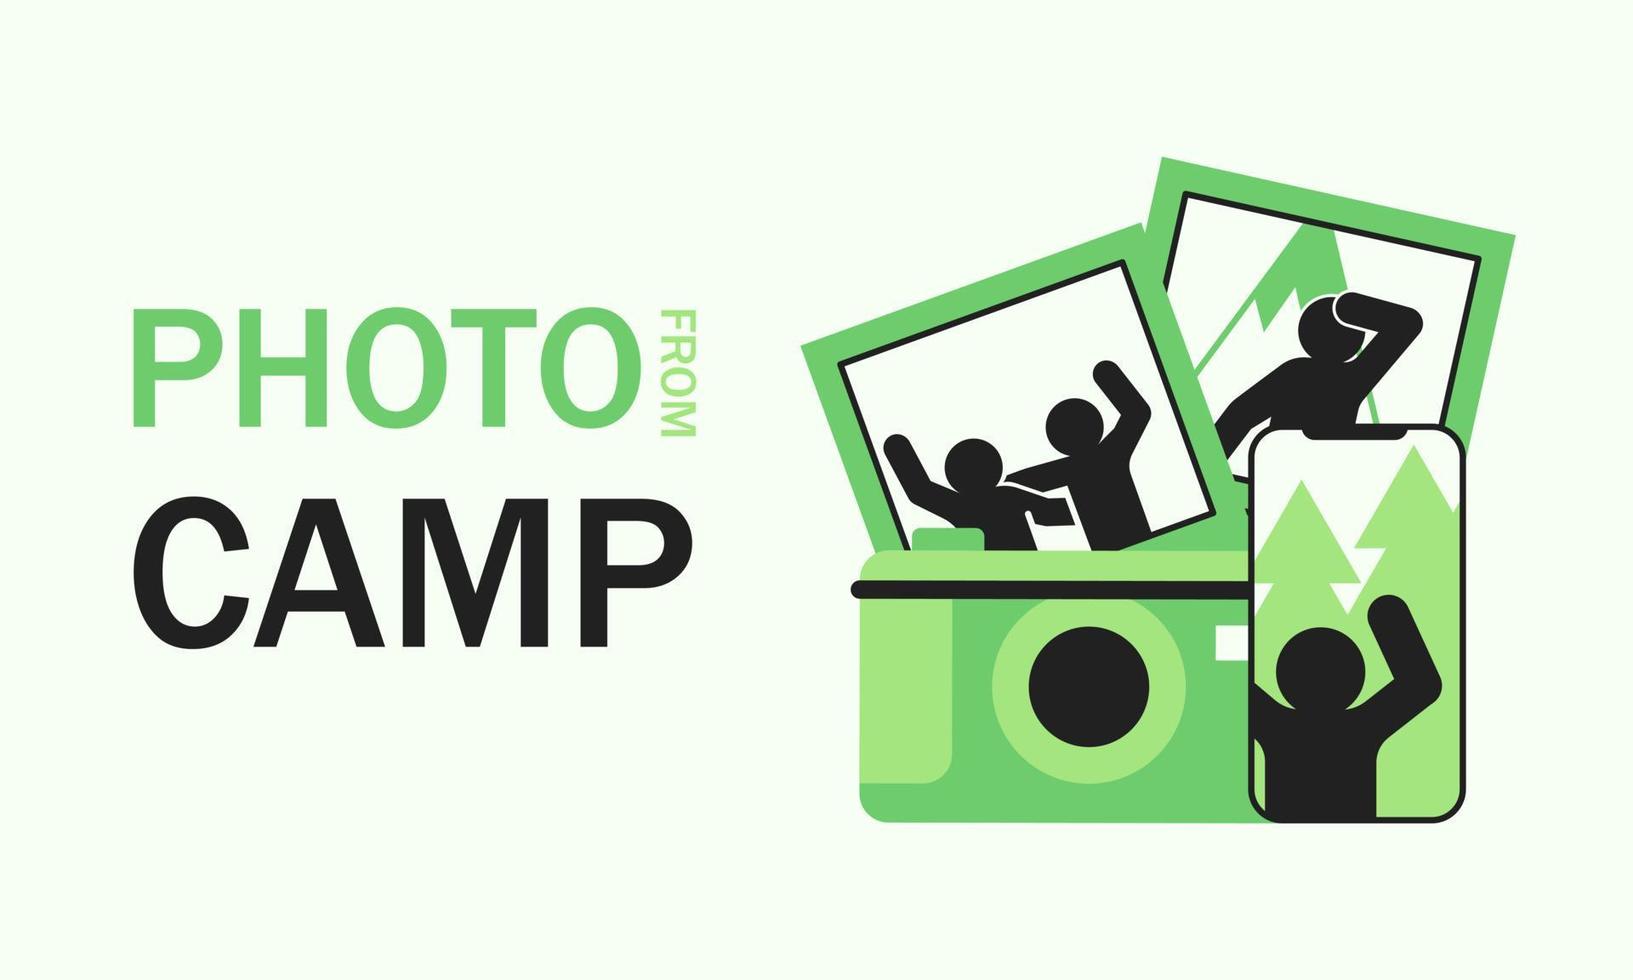 Photo from camp text with snapshots, photo on smartphone and camera. Concept photo on camera and cellphone camping, travel and outdoor banner vector